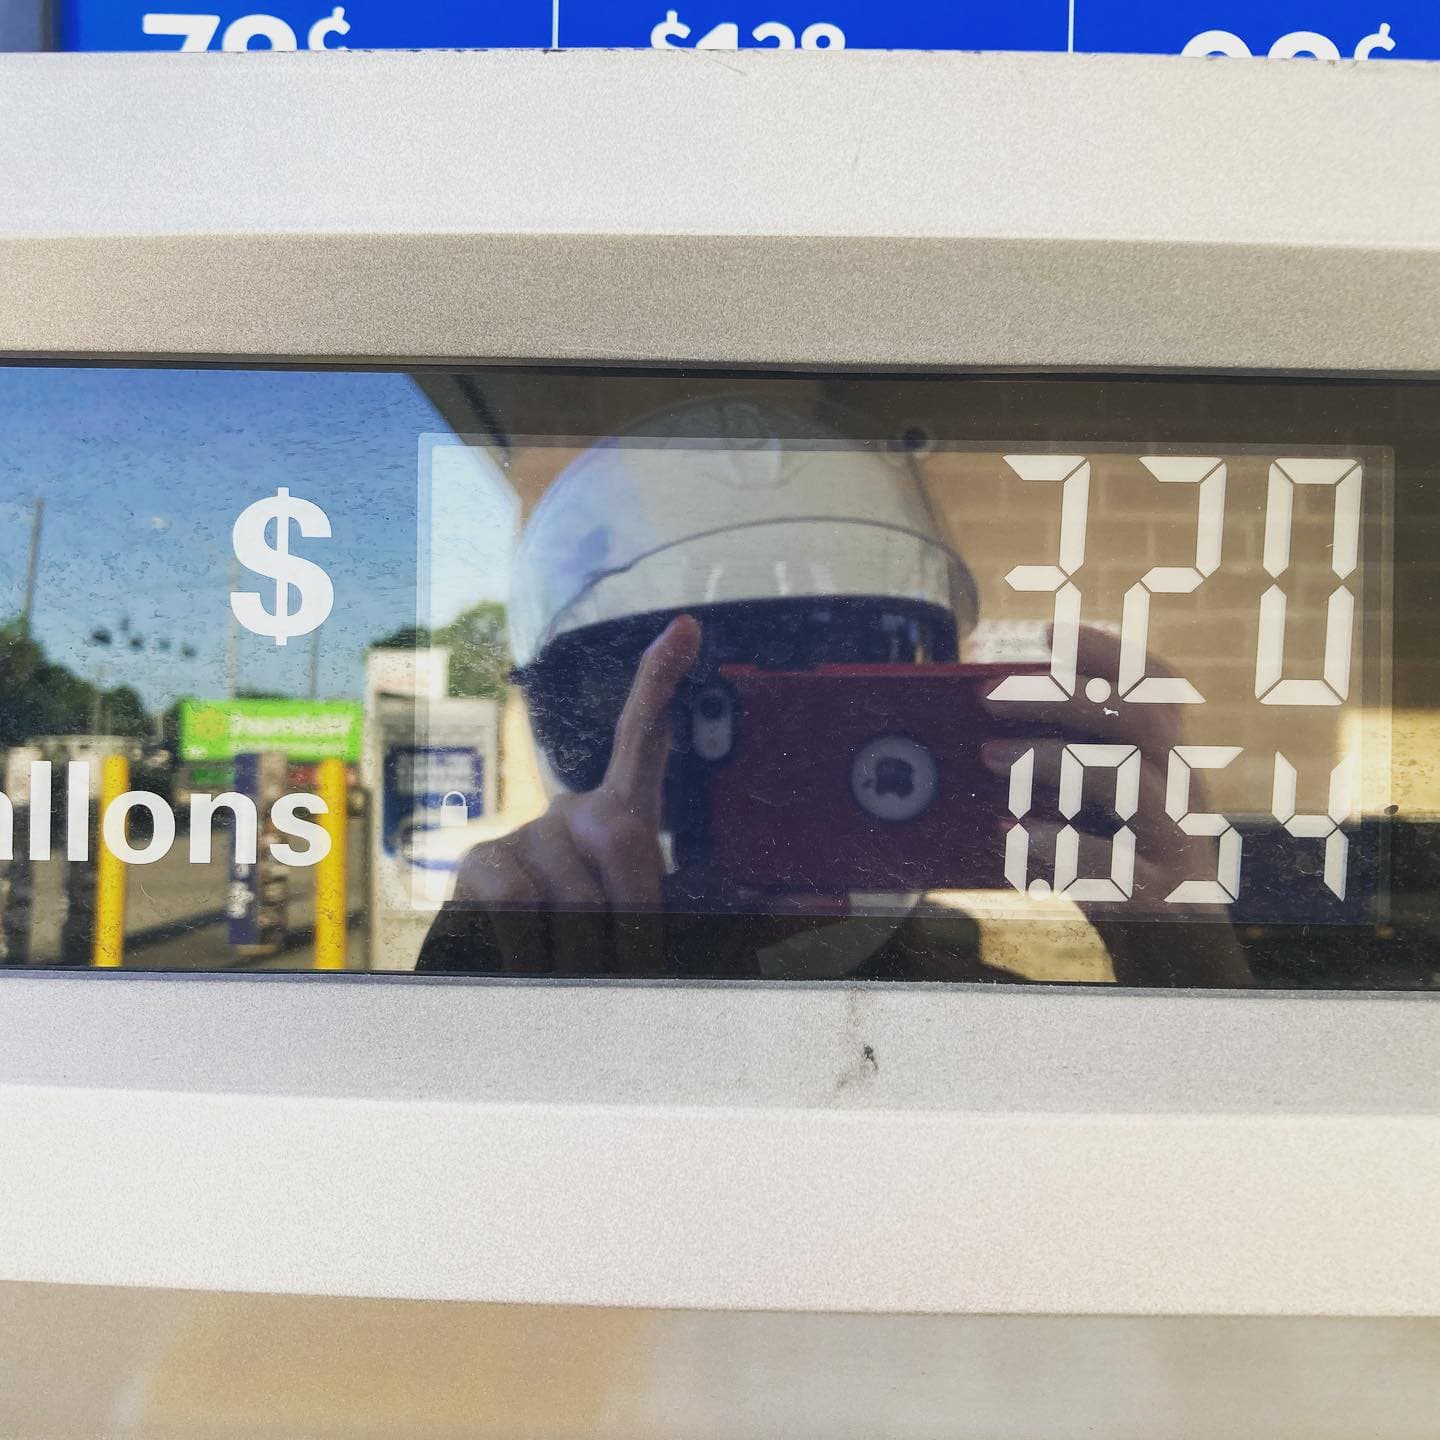 Gas pump display with 1.054 gallons that cost $3.20 with reflection of phone and helmet in the background